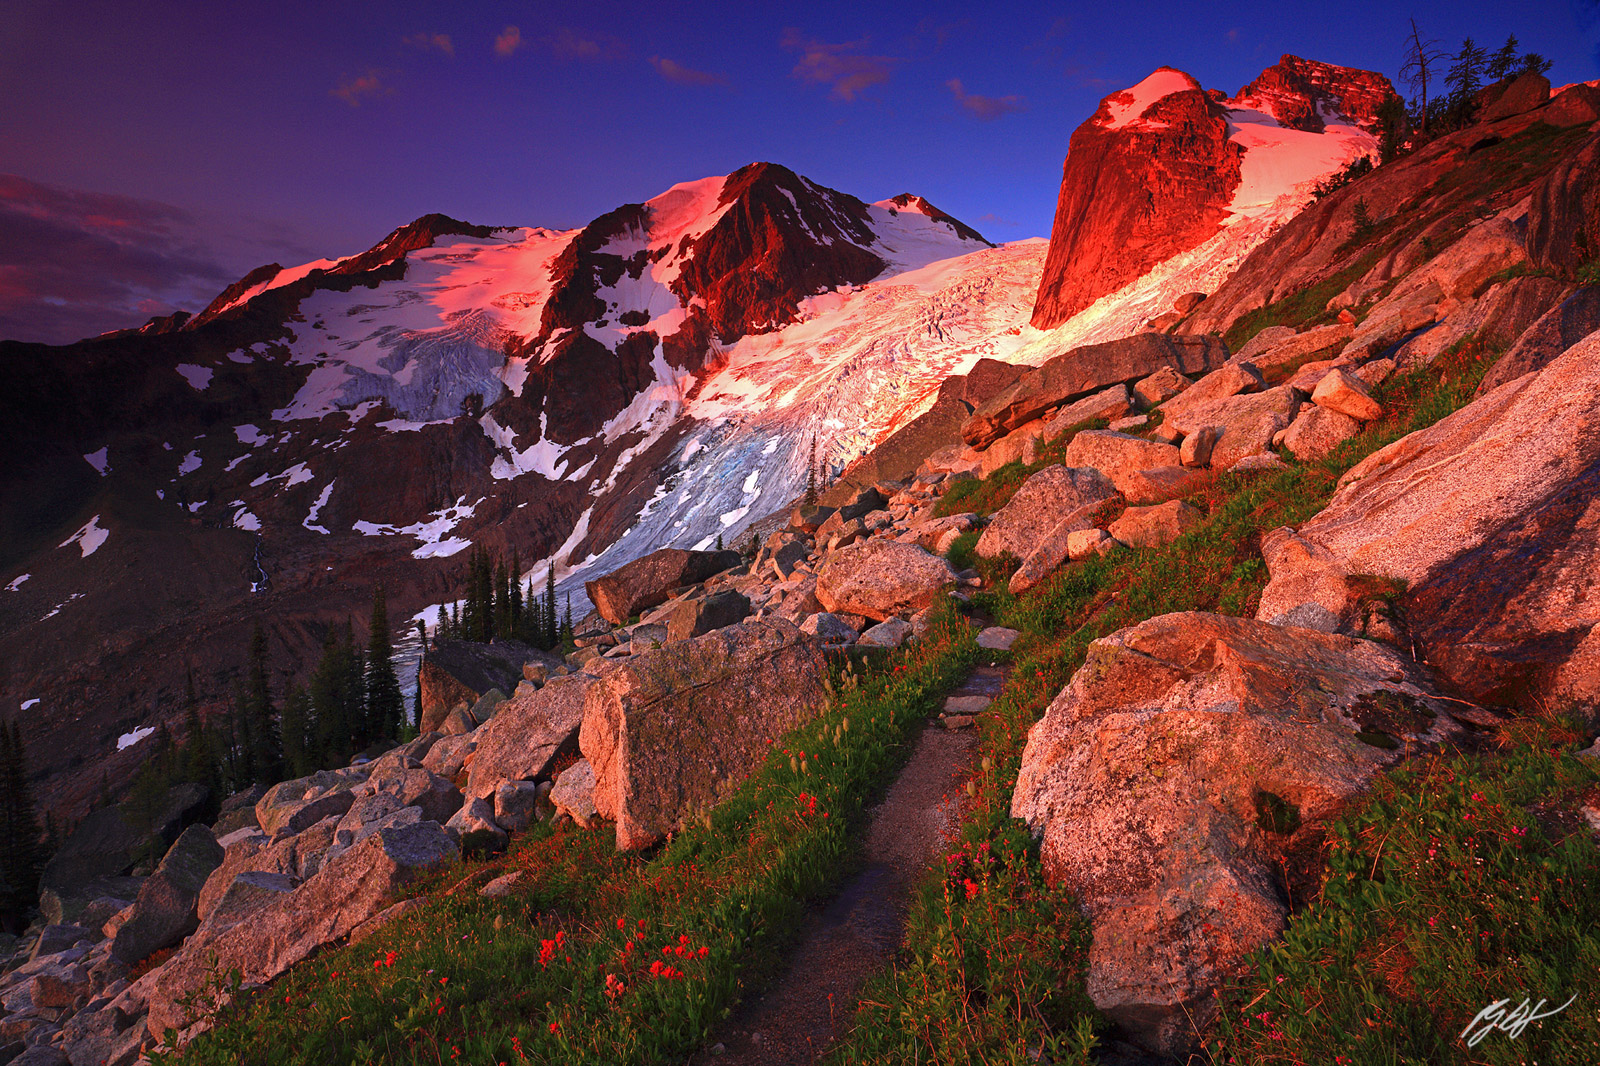 Sunset on the Bugaboo Mountains in Bugaboo Provincial Park in Canada